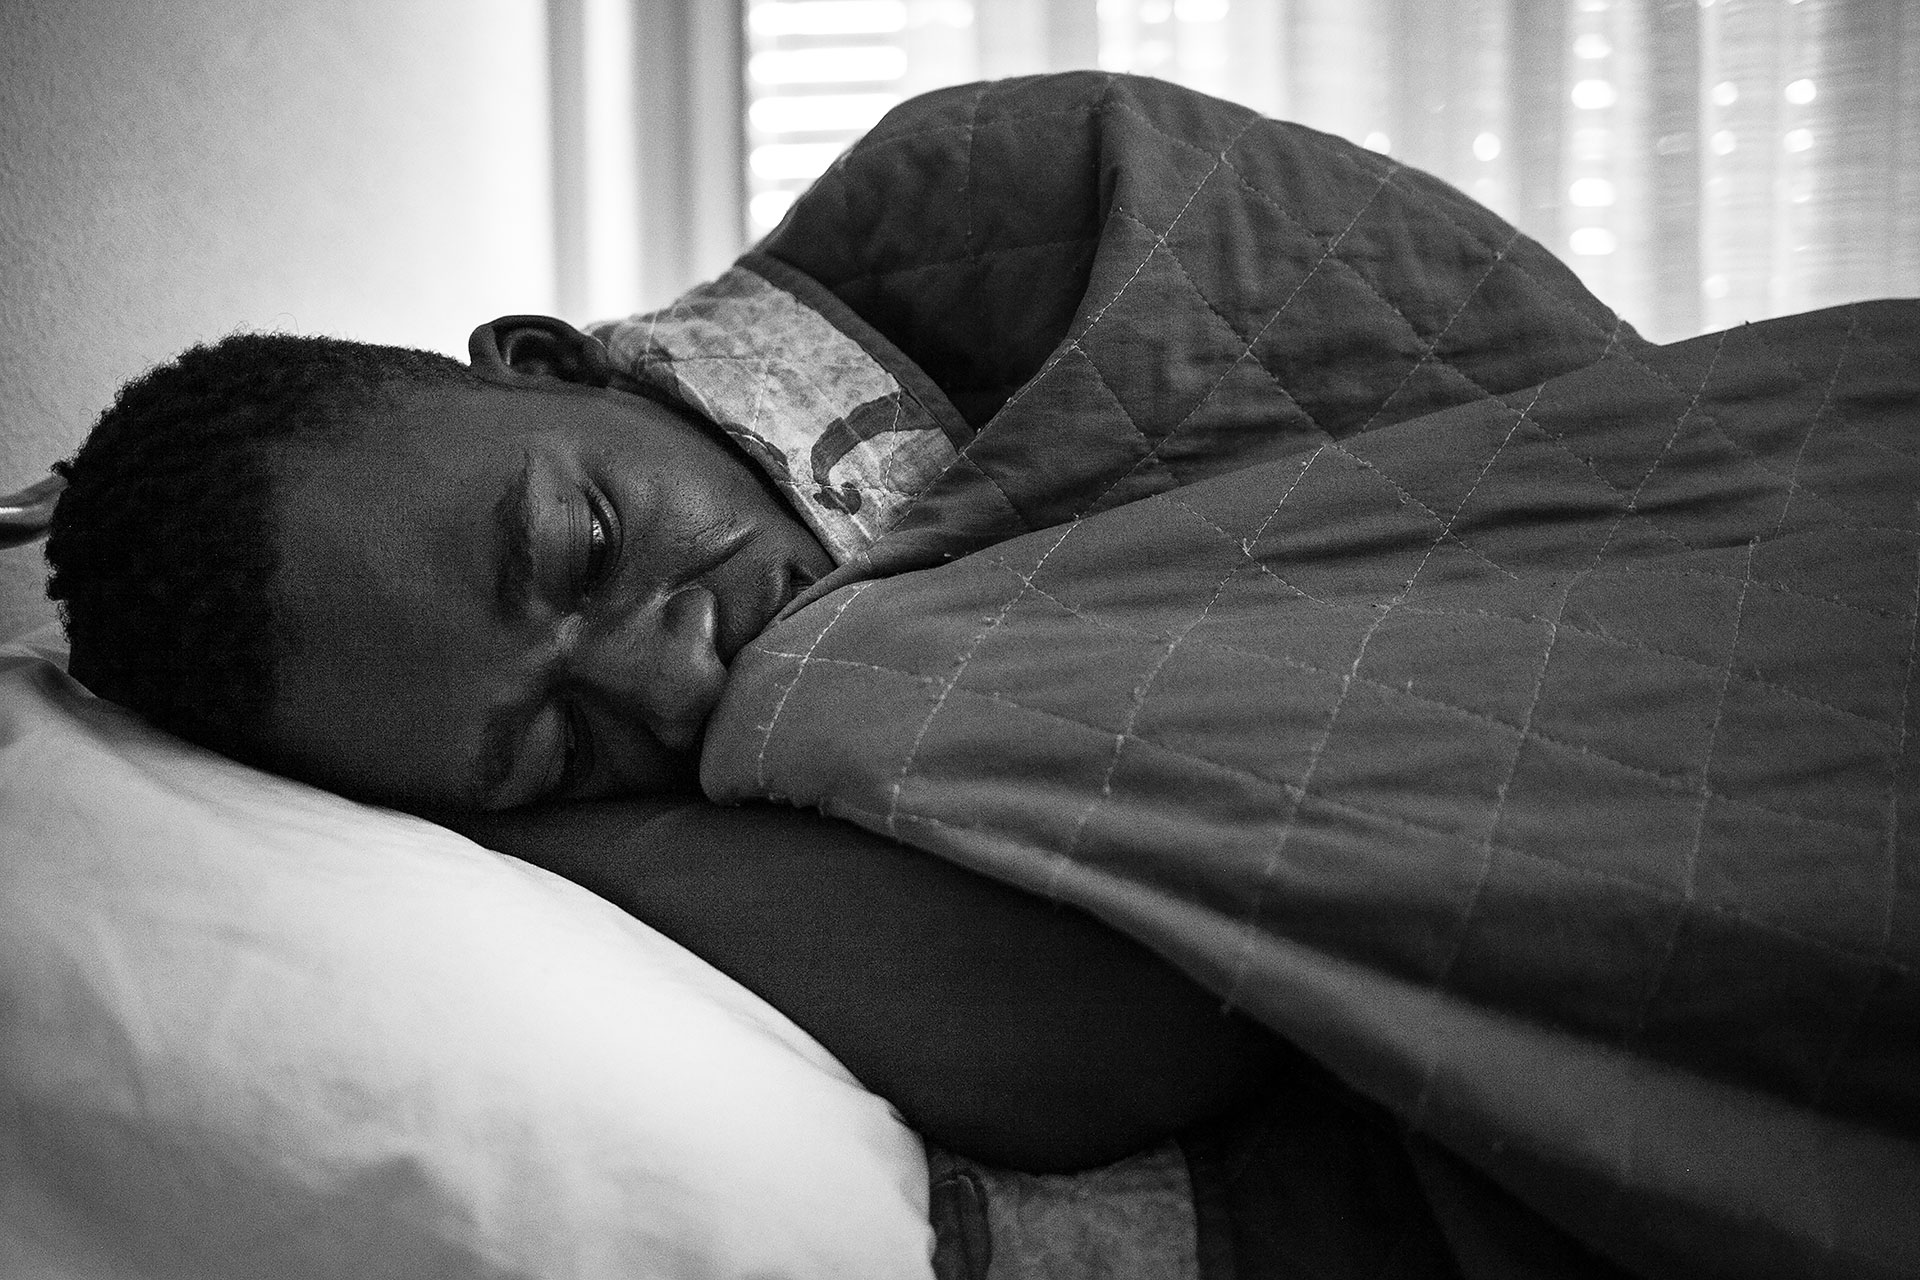 Malick lying in his bed in Hotel Colibri. He shares a room with three other people from The Gambia and Senegal.